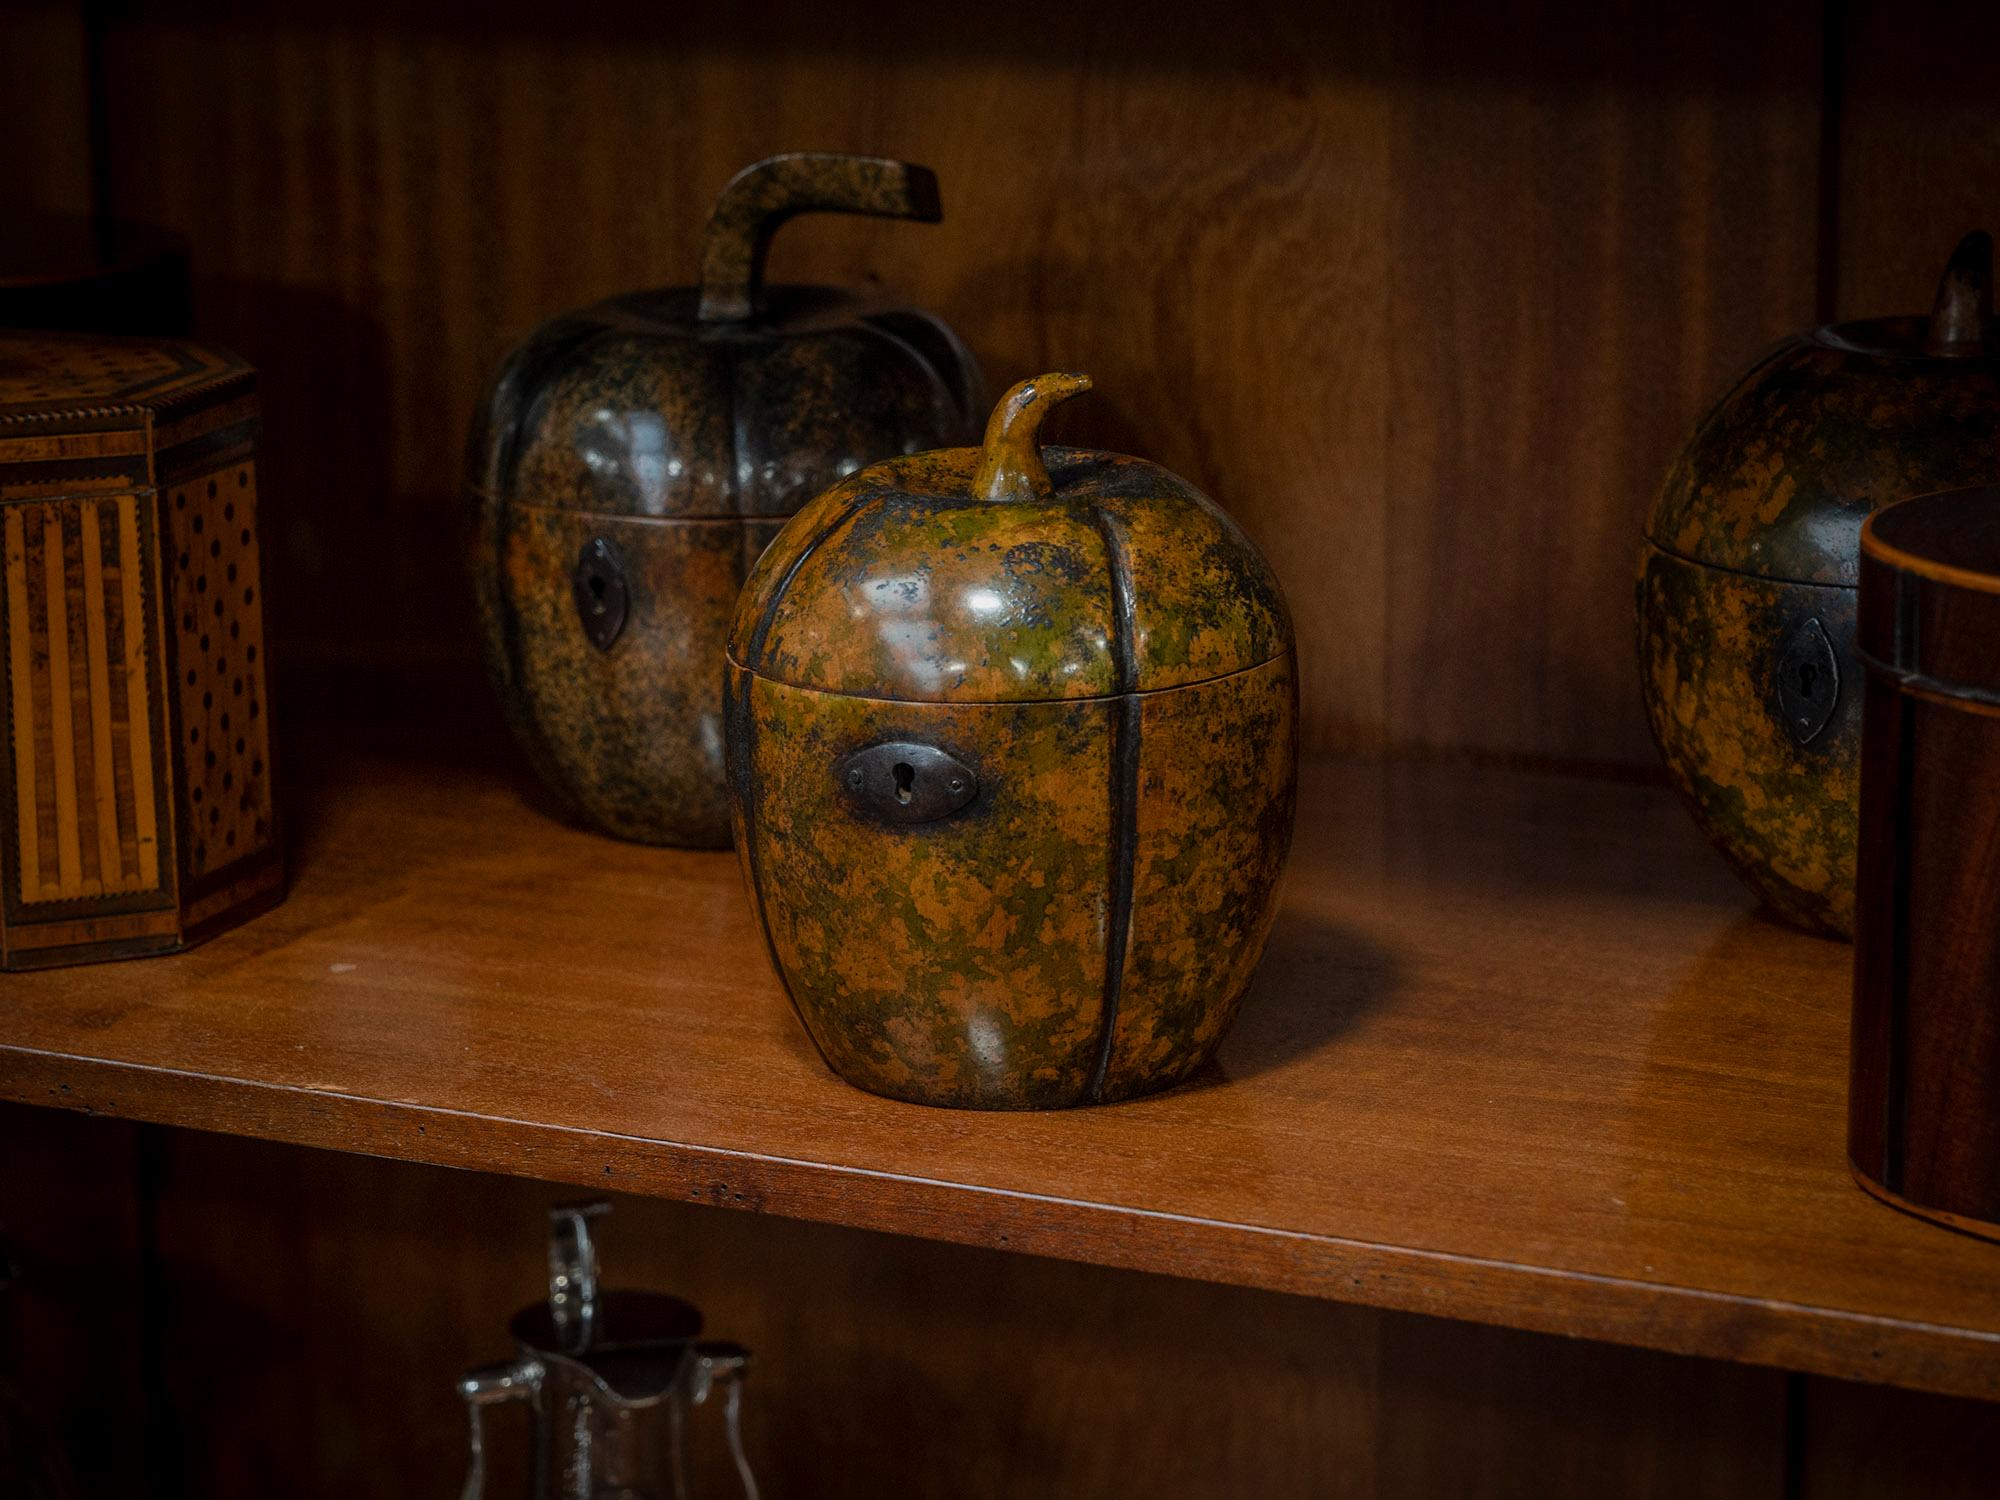 The Tea Caddy is an exceptional example shaped as a Melon and made from Sycamore with a beautiful mottled patination showing colours of moss green and subtle orange. The Tea Caddy surmounted by a curved naturalistic finial. To the front of the